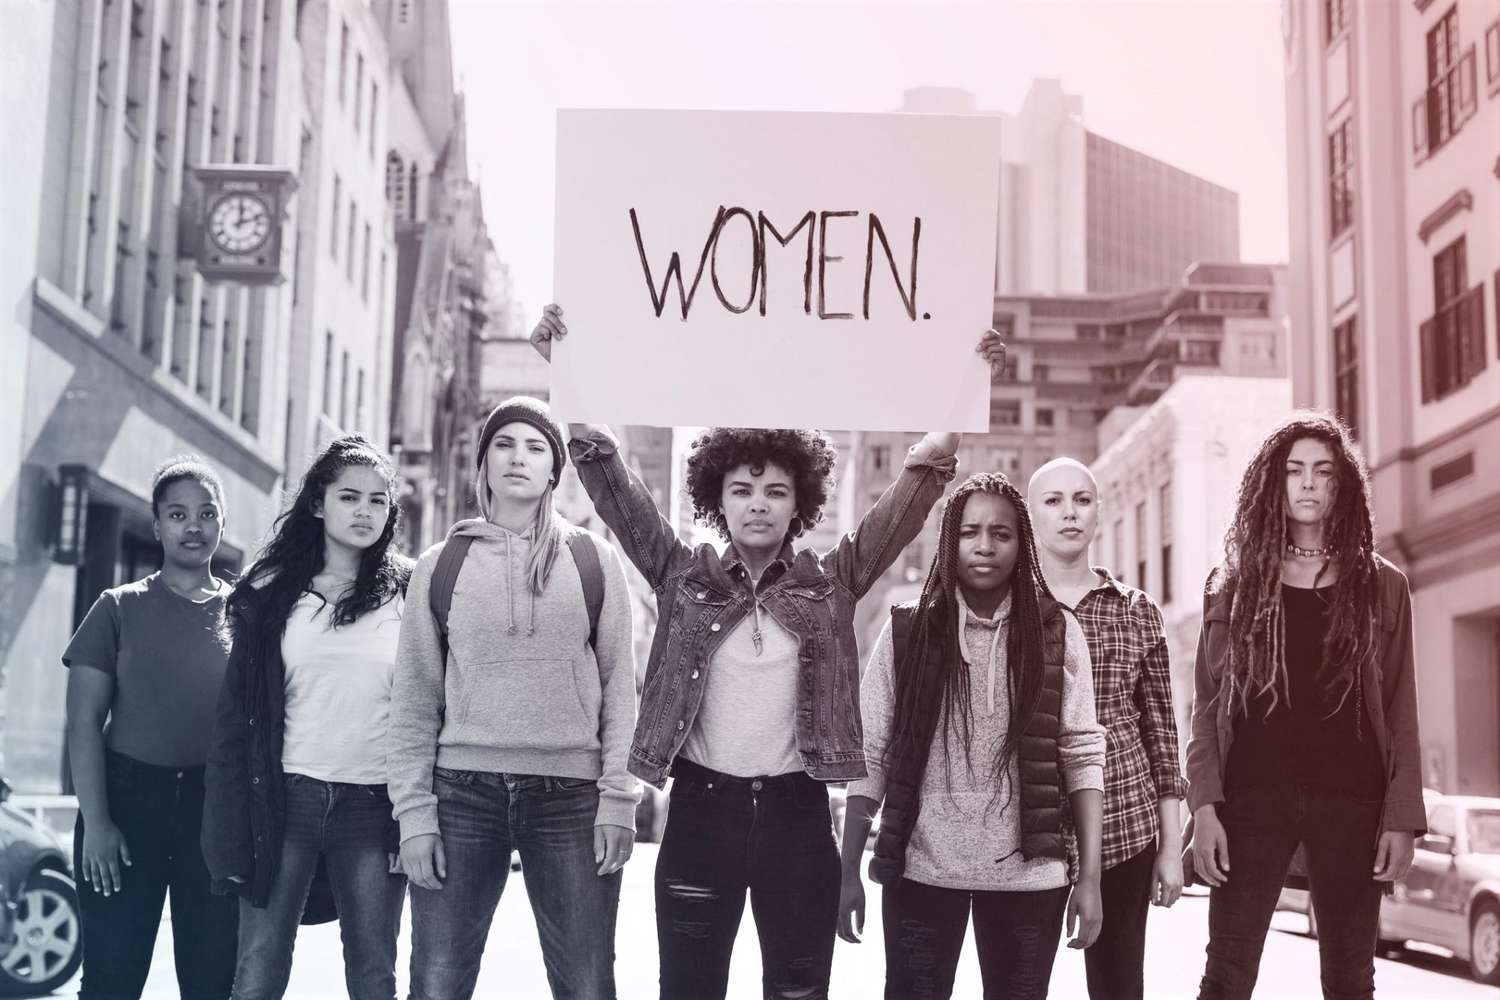 Women’s History Month – What, Why & How?